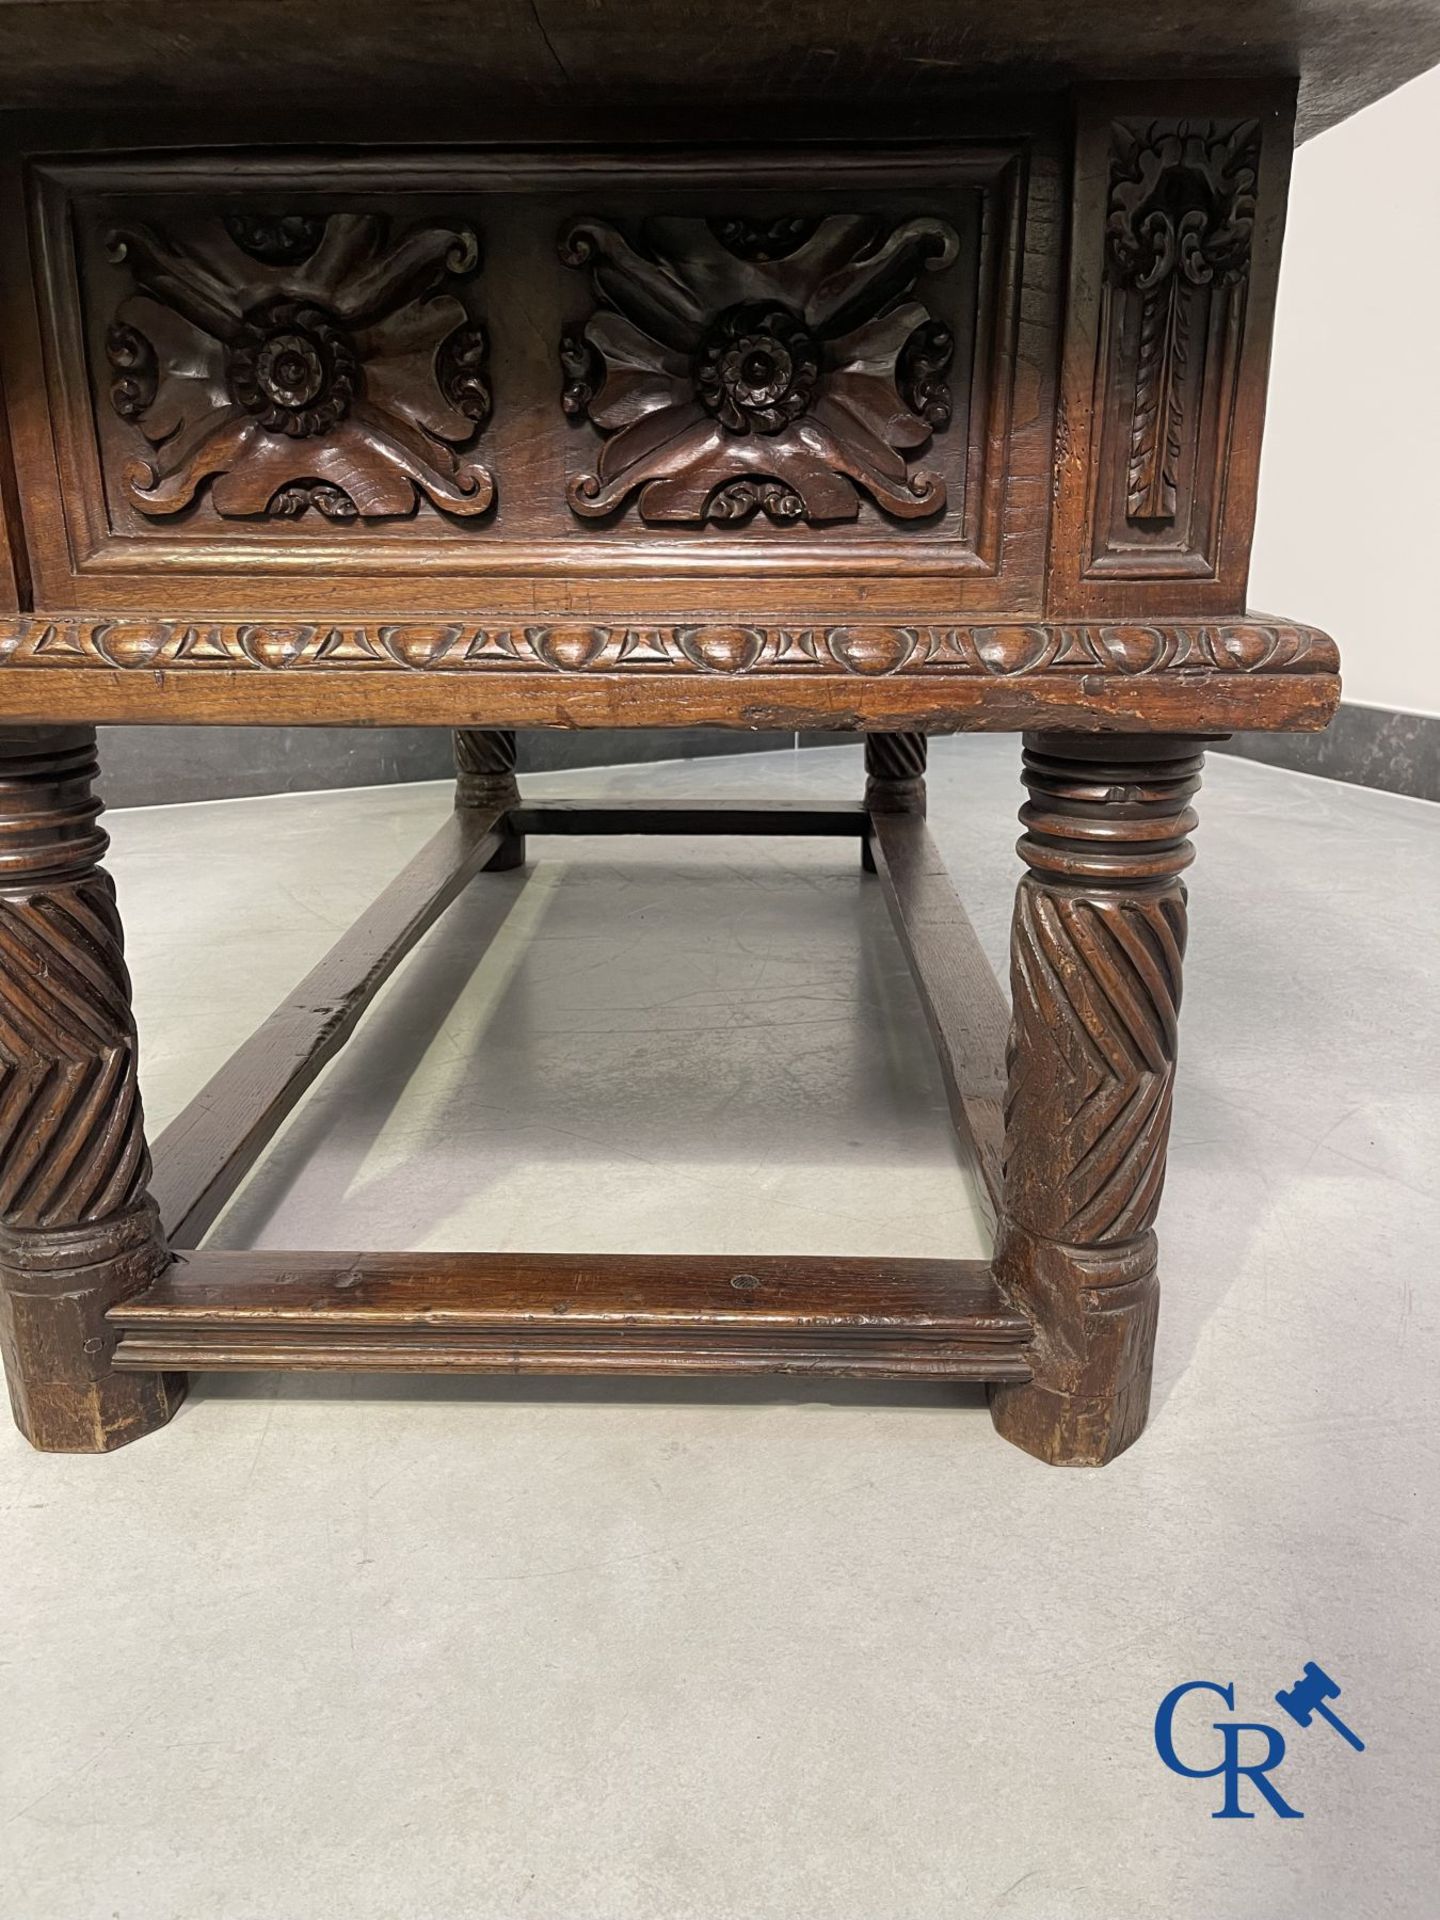 Furniture: 17th century carved walnut table with 3 drawers. - Image 15 of 22